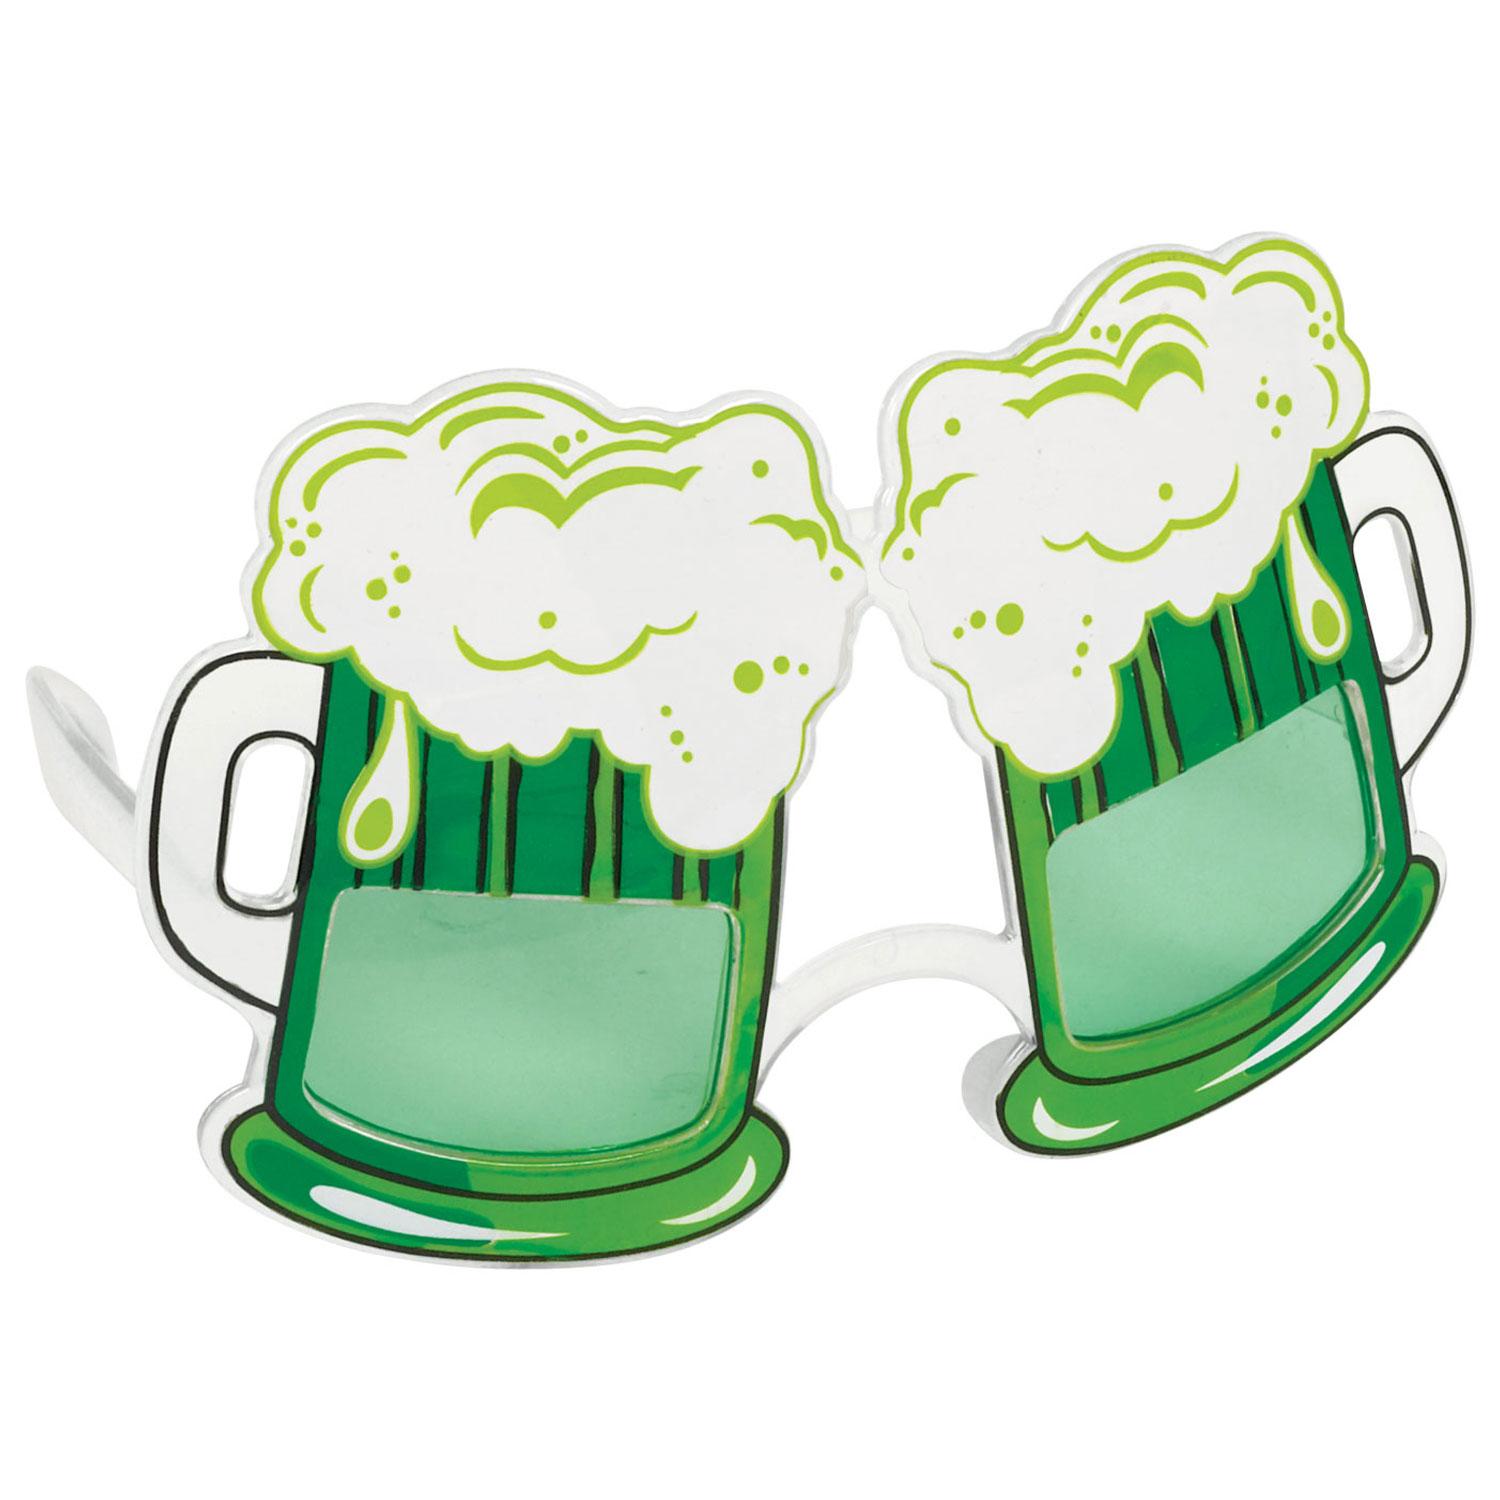 Green Beer Party Glasses for St Patrick's Day by Amscan 250914 available here at Karnival Costumes online party shop